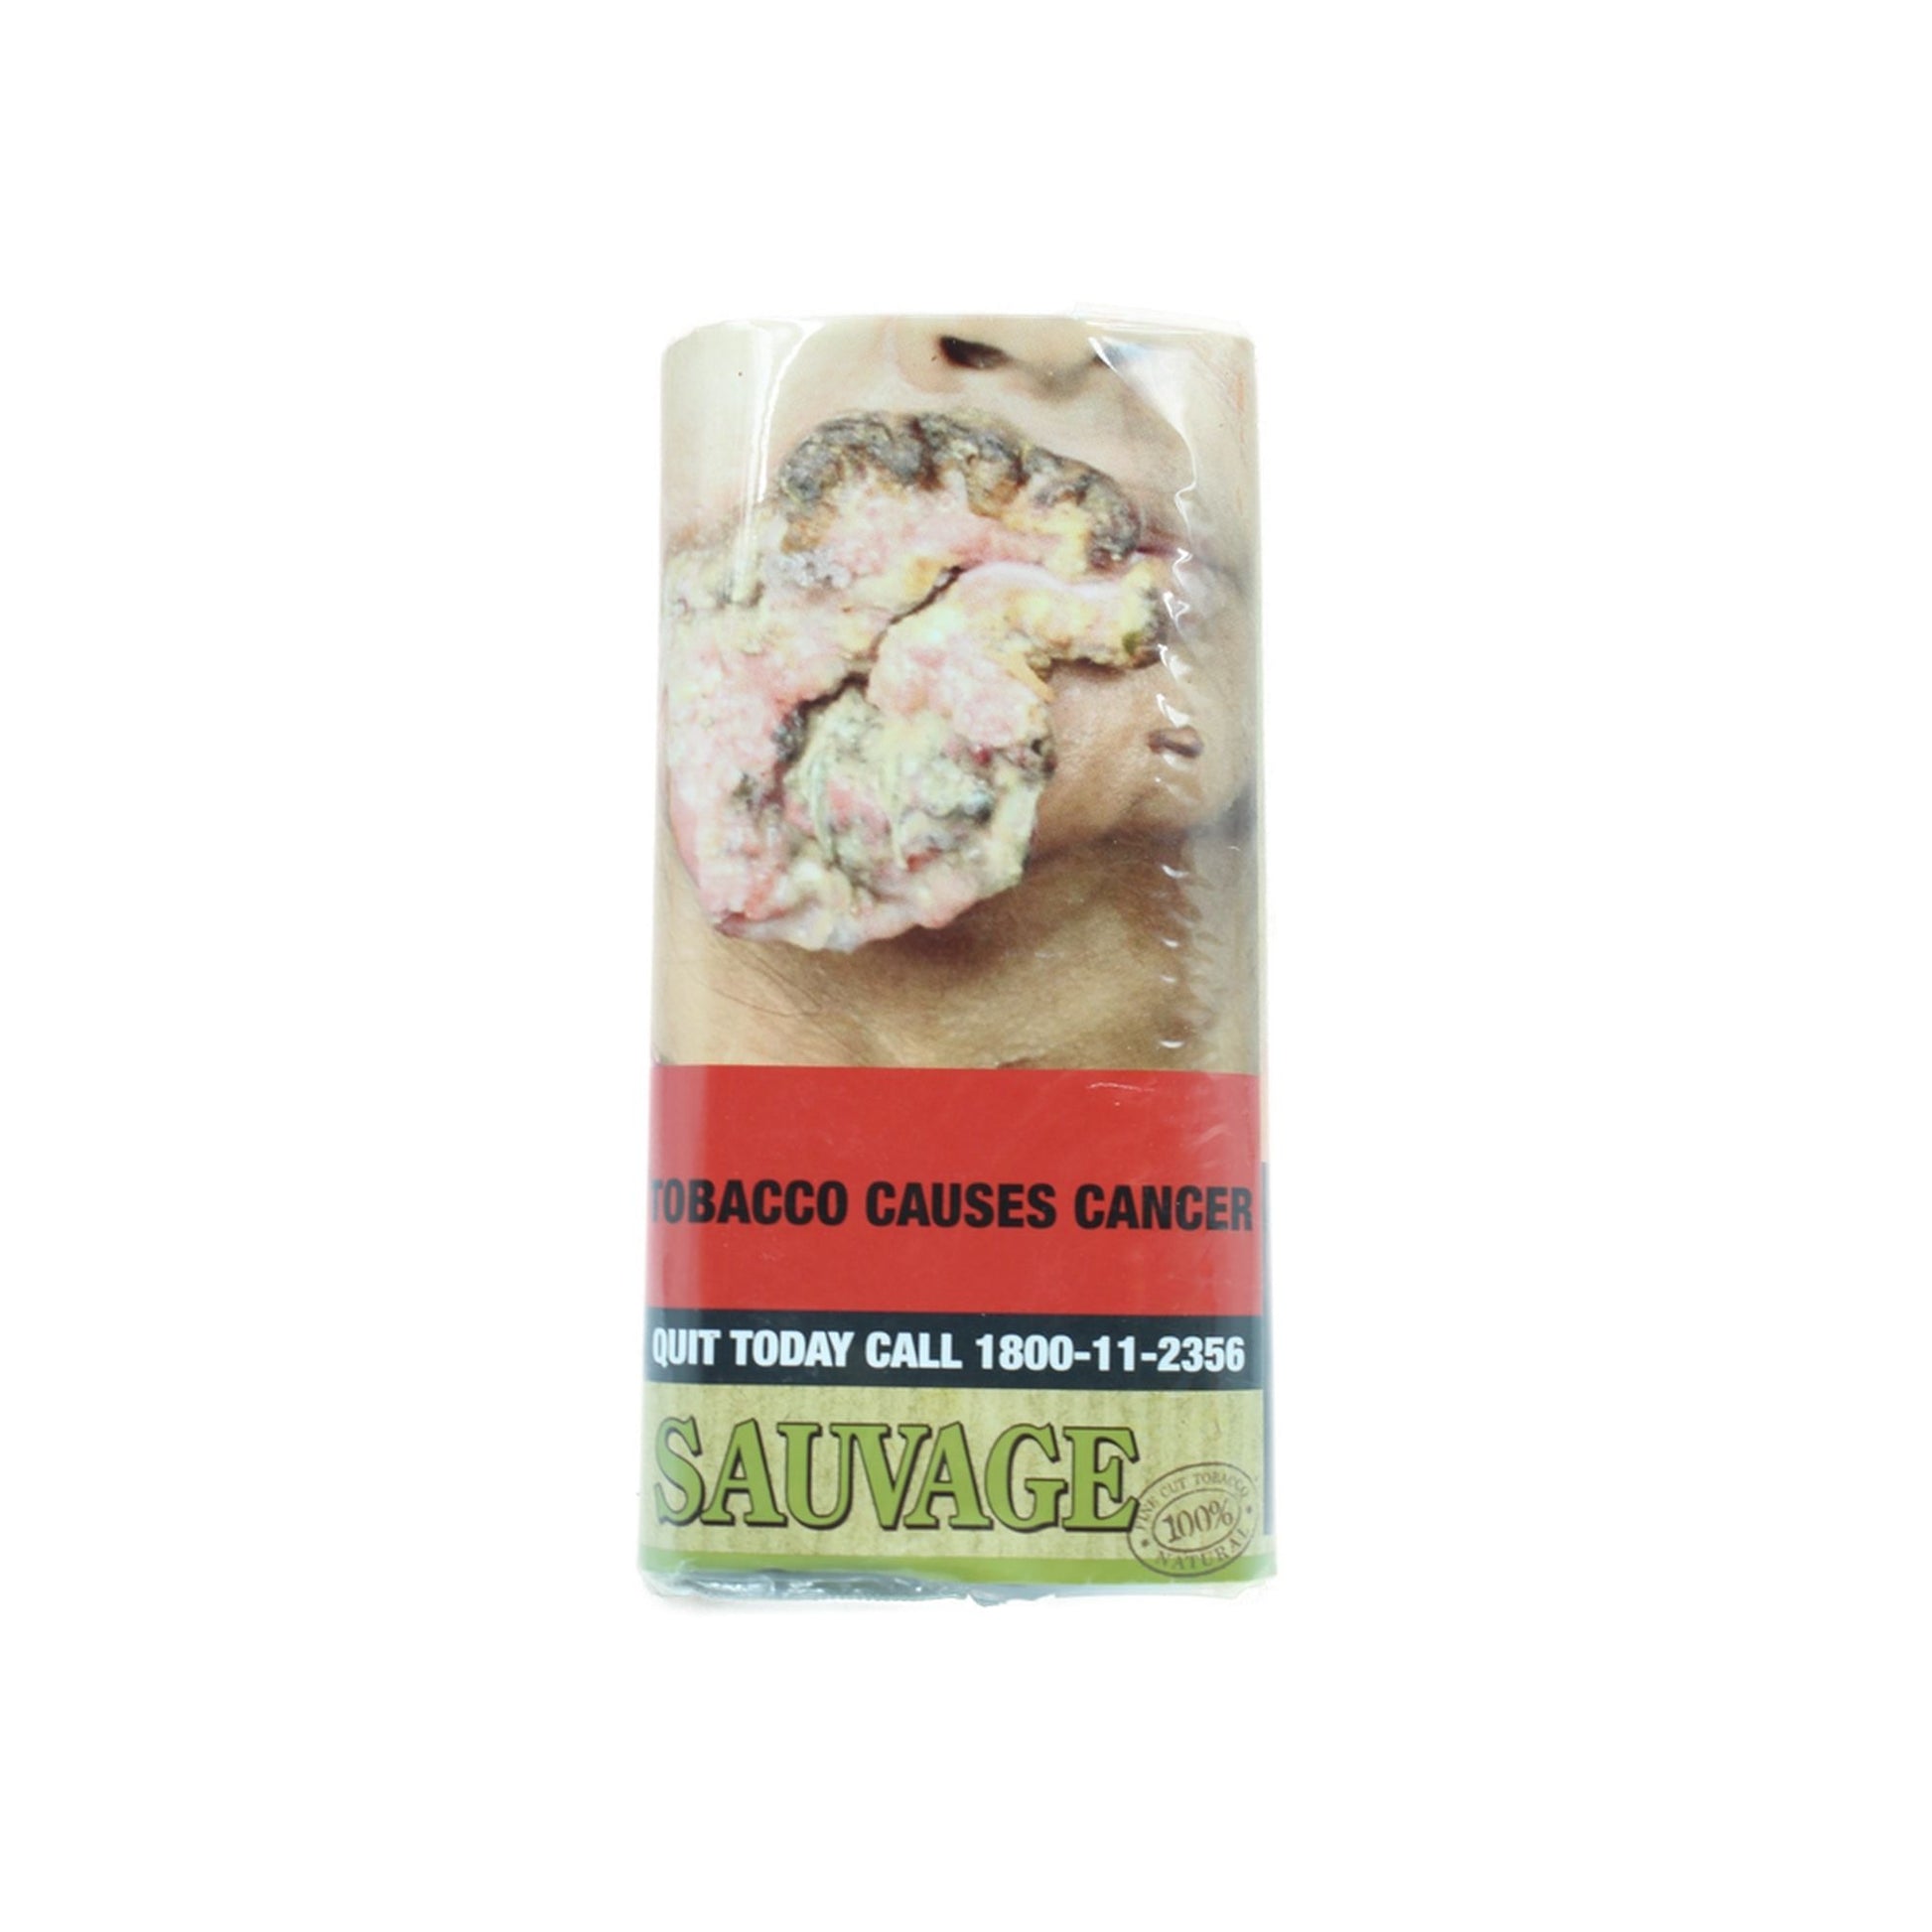 BUY FLANDRIA SAUVAGE HAND ROLLING TOBACCO ONLINE IN INDIA AT HIGHJACK